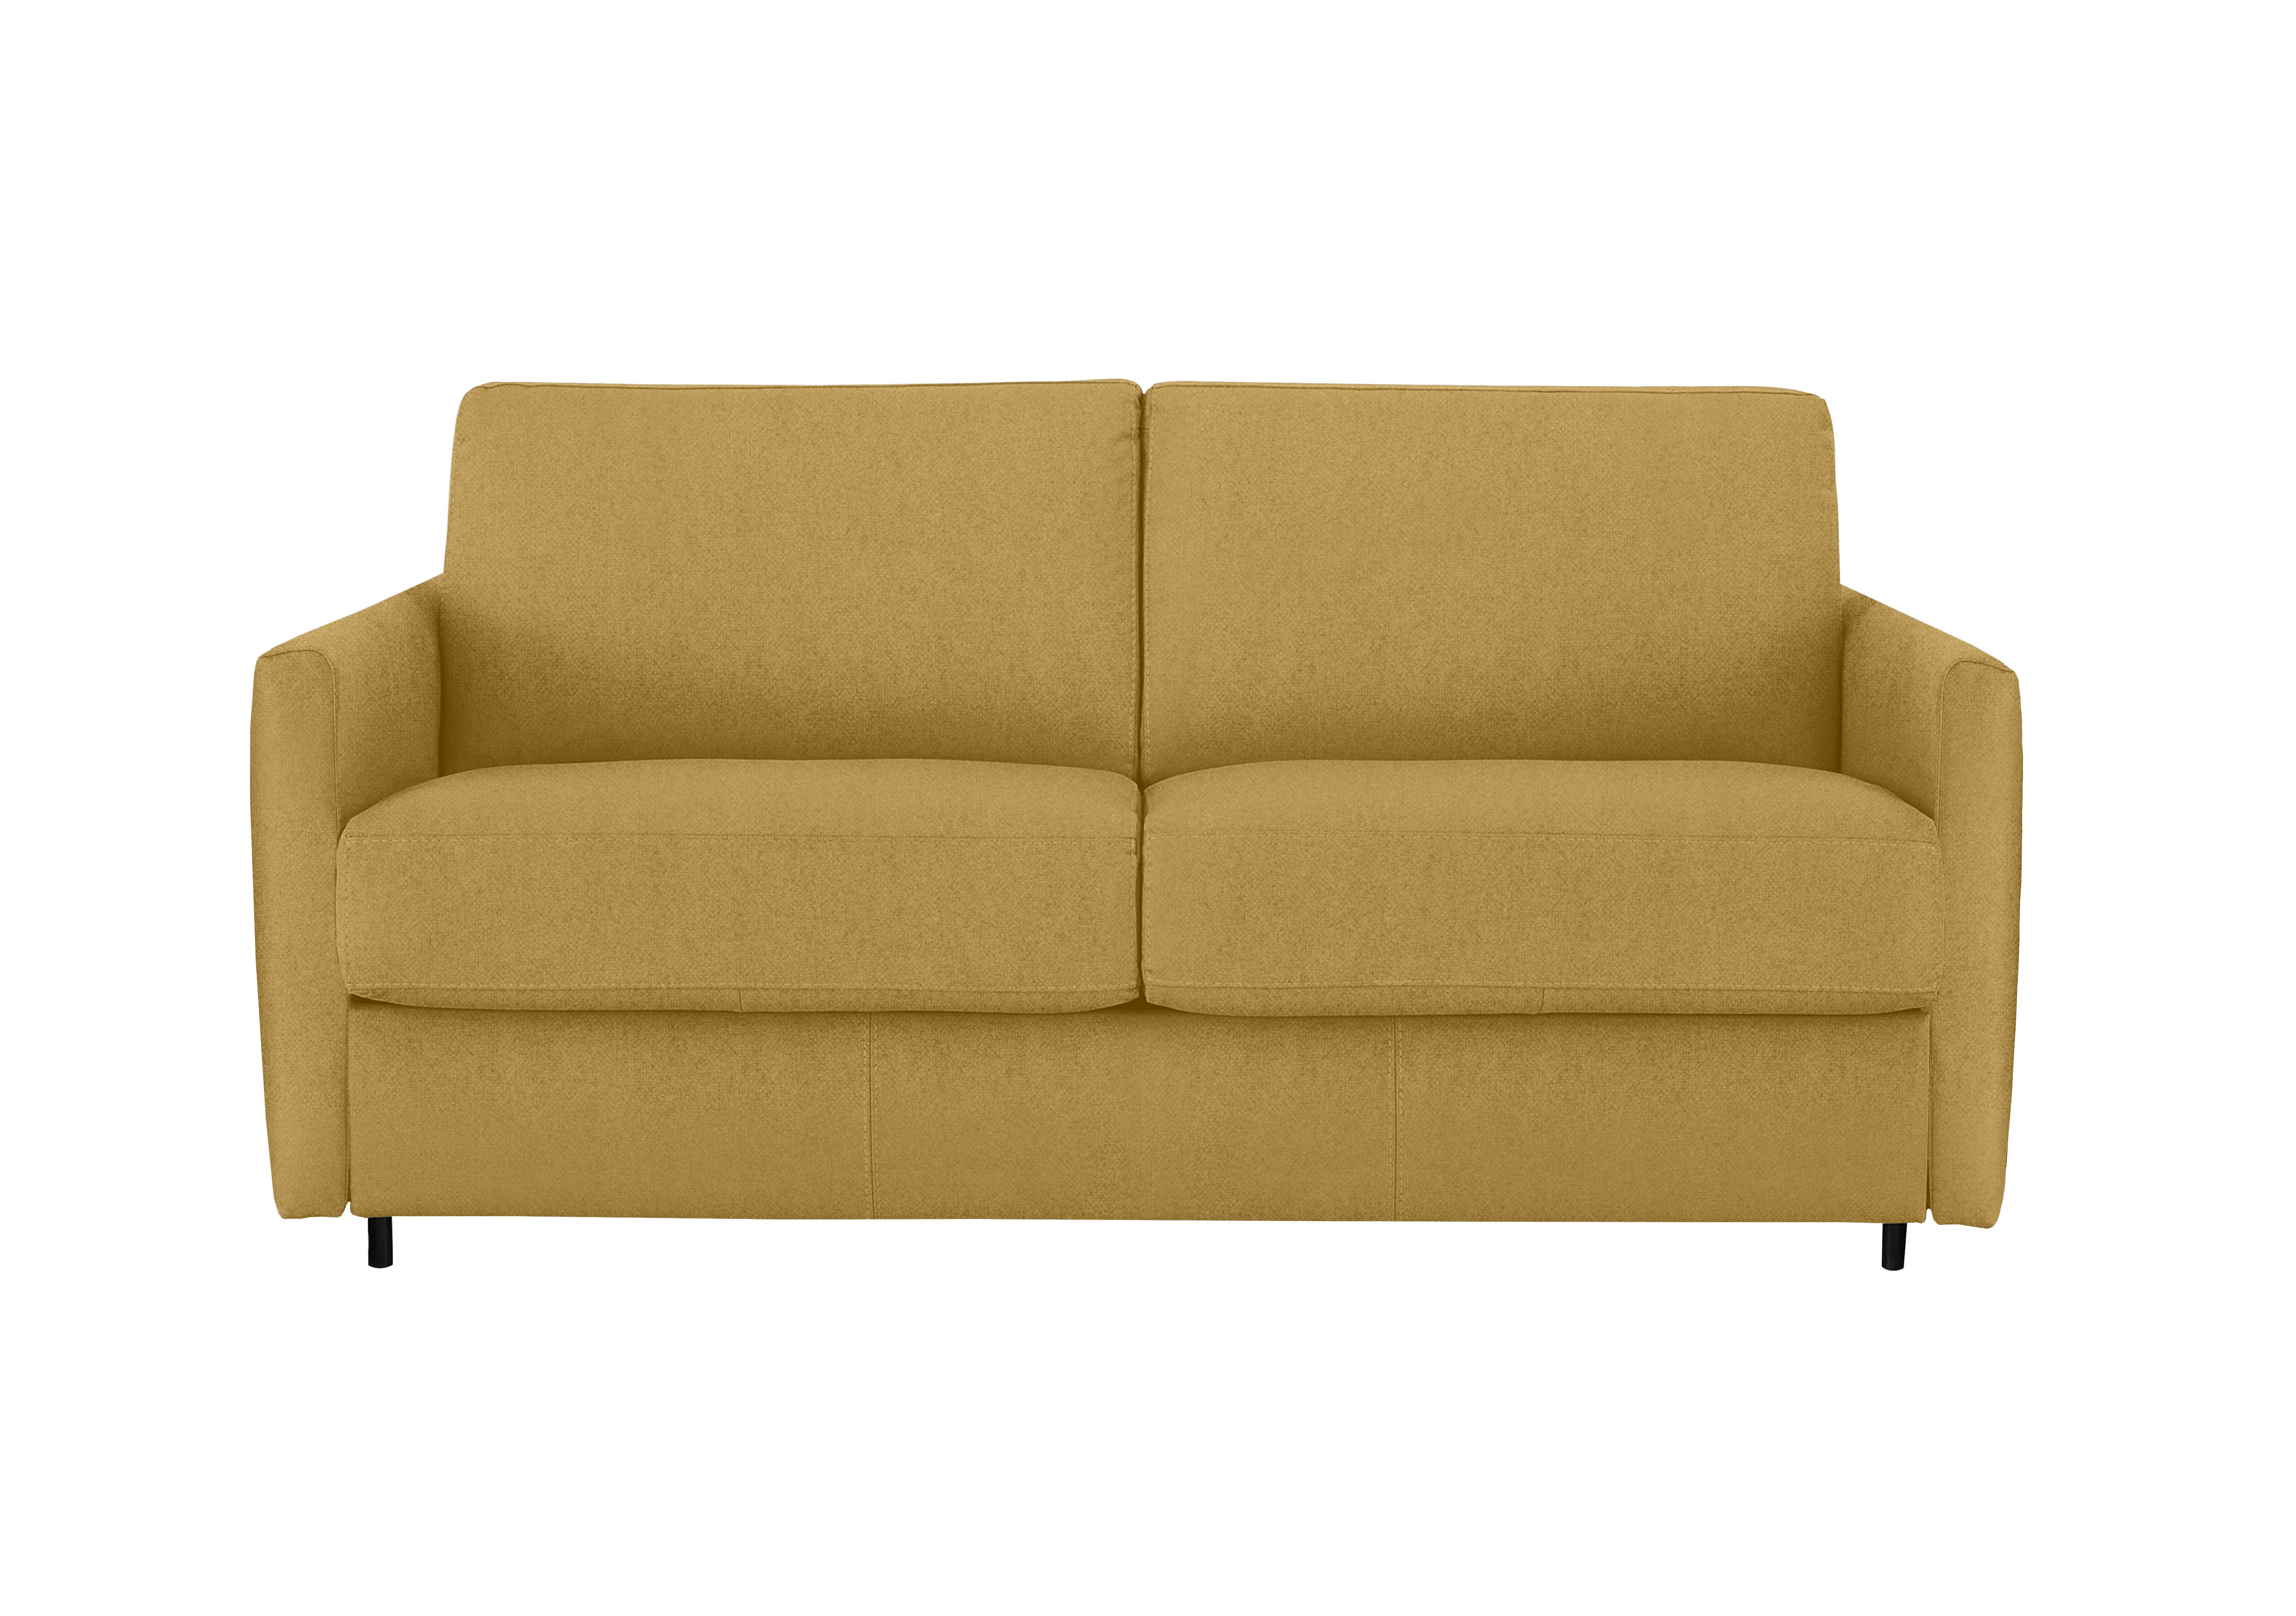 Alcova 2.5 Seater Fabric Sofa Bed with Slim Arms in Fuente Mostaza on Furniture Village